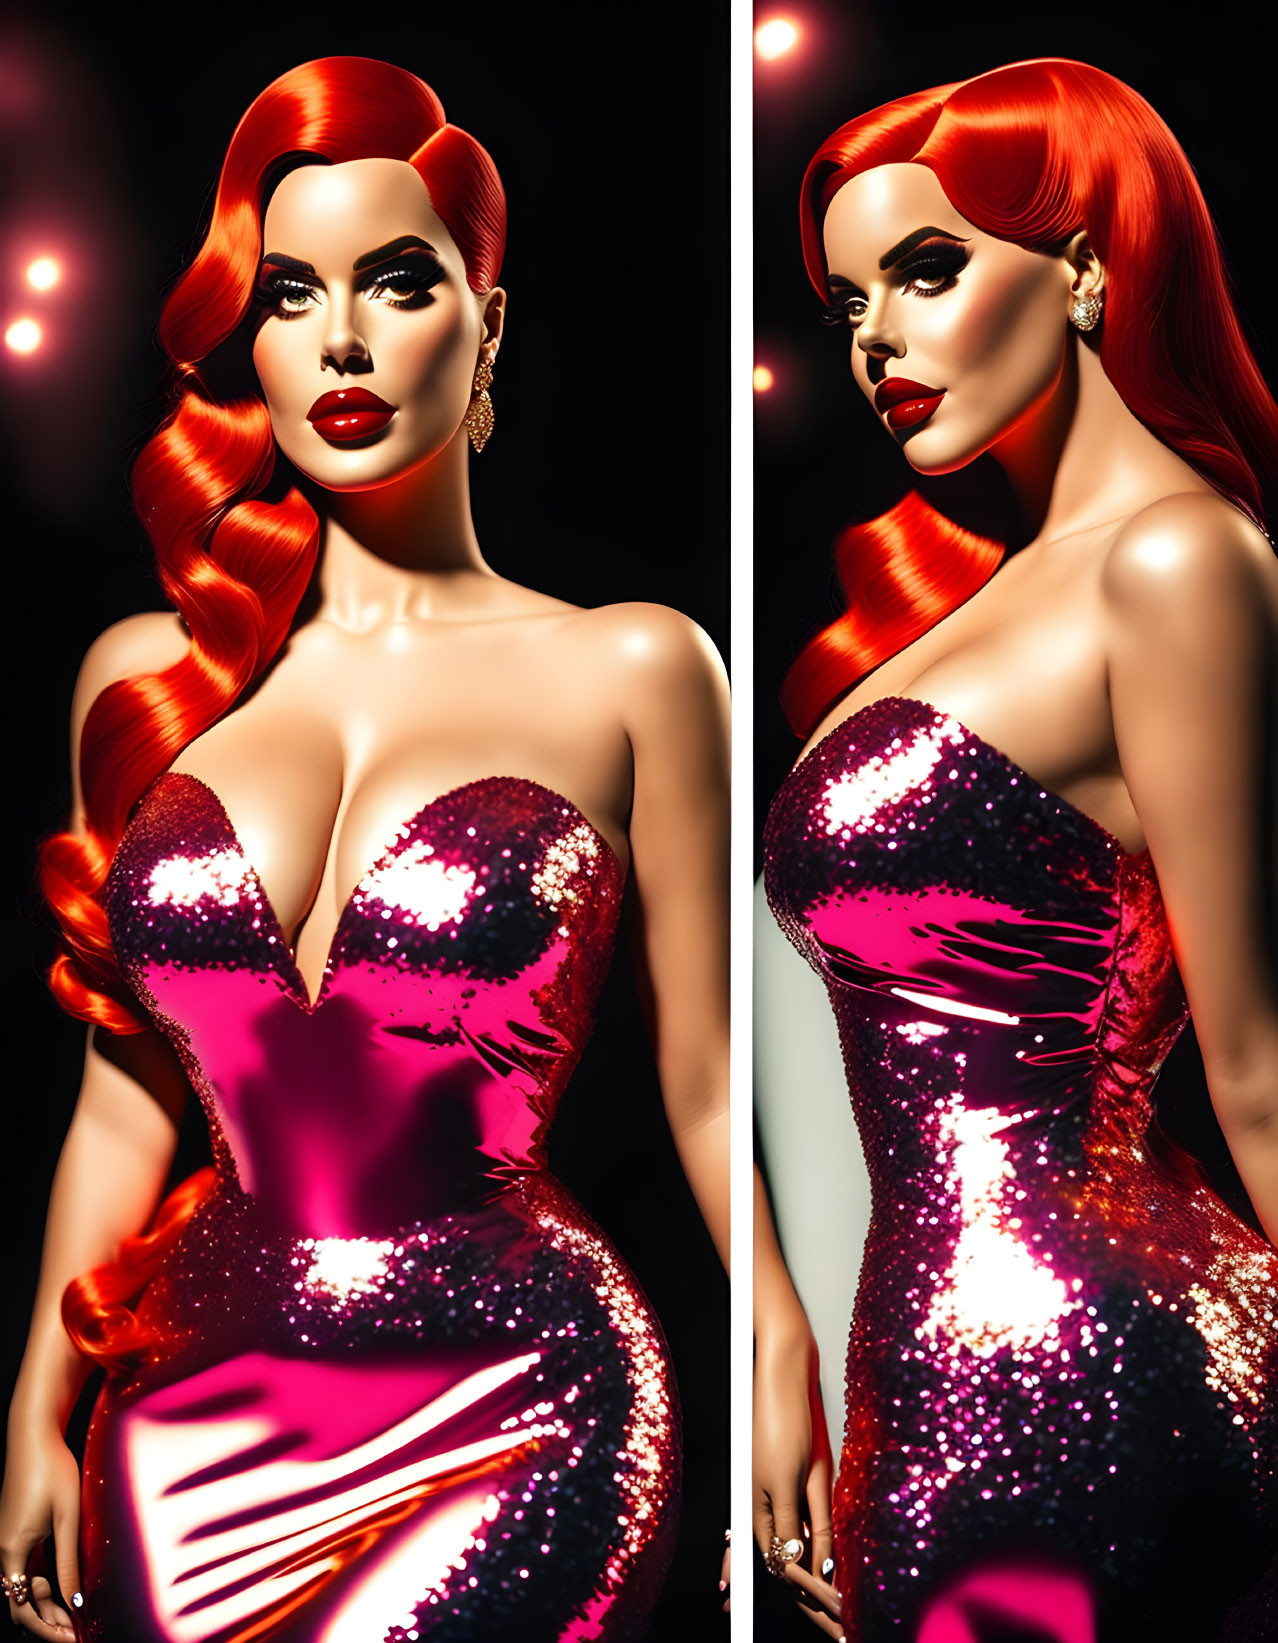 Digital artwork featuring woman with vibrant red hair and pink dress in two poses against dark backdrop